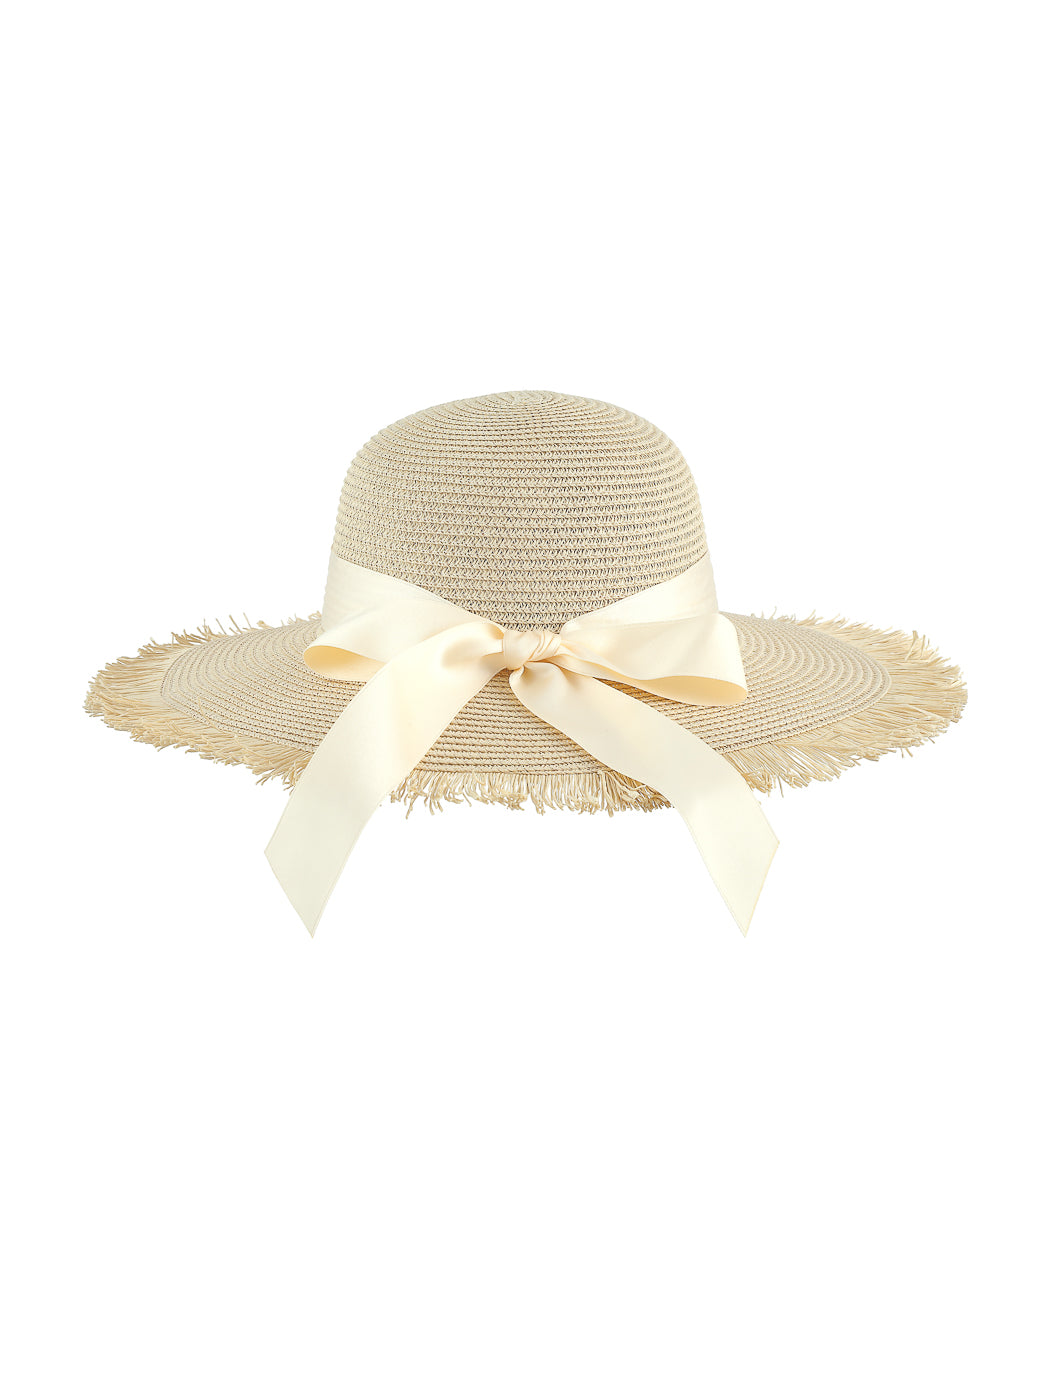 MINISO HAPPY VACATION STRAW HAT ( CREAMY WHITE ) 2010116710104 FASHIONABLE HAT-1